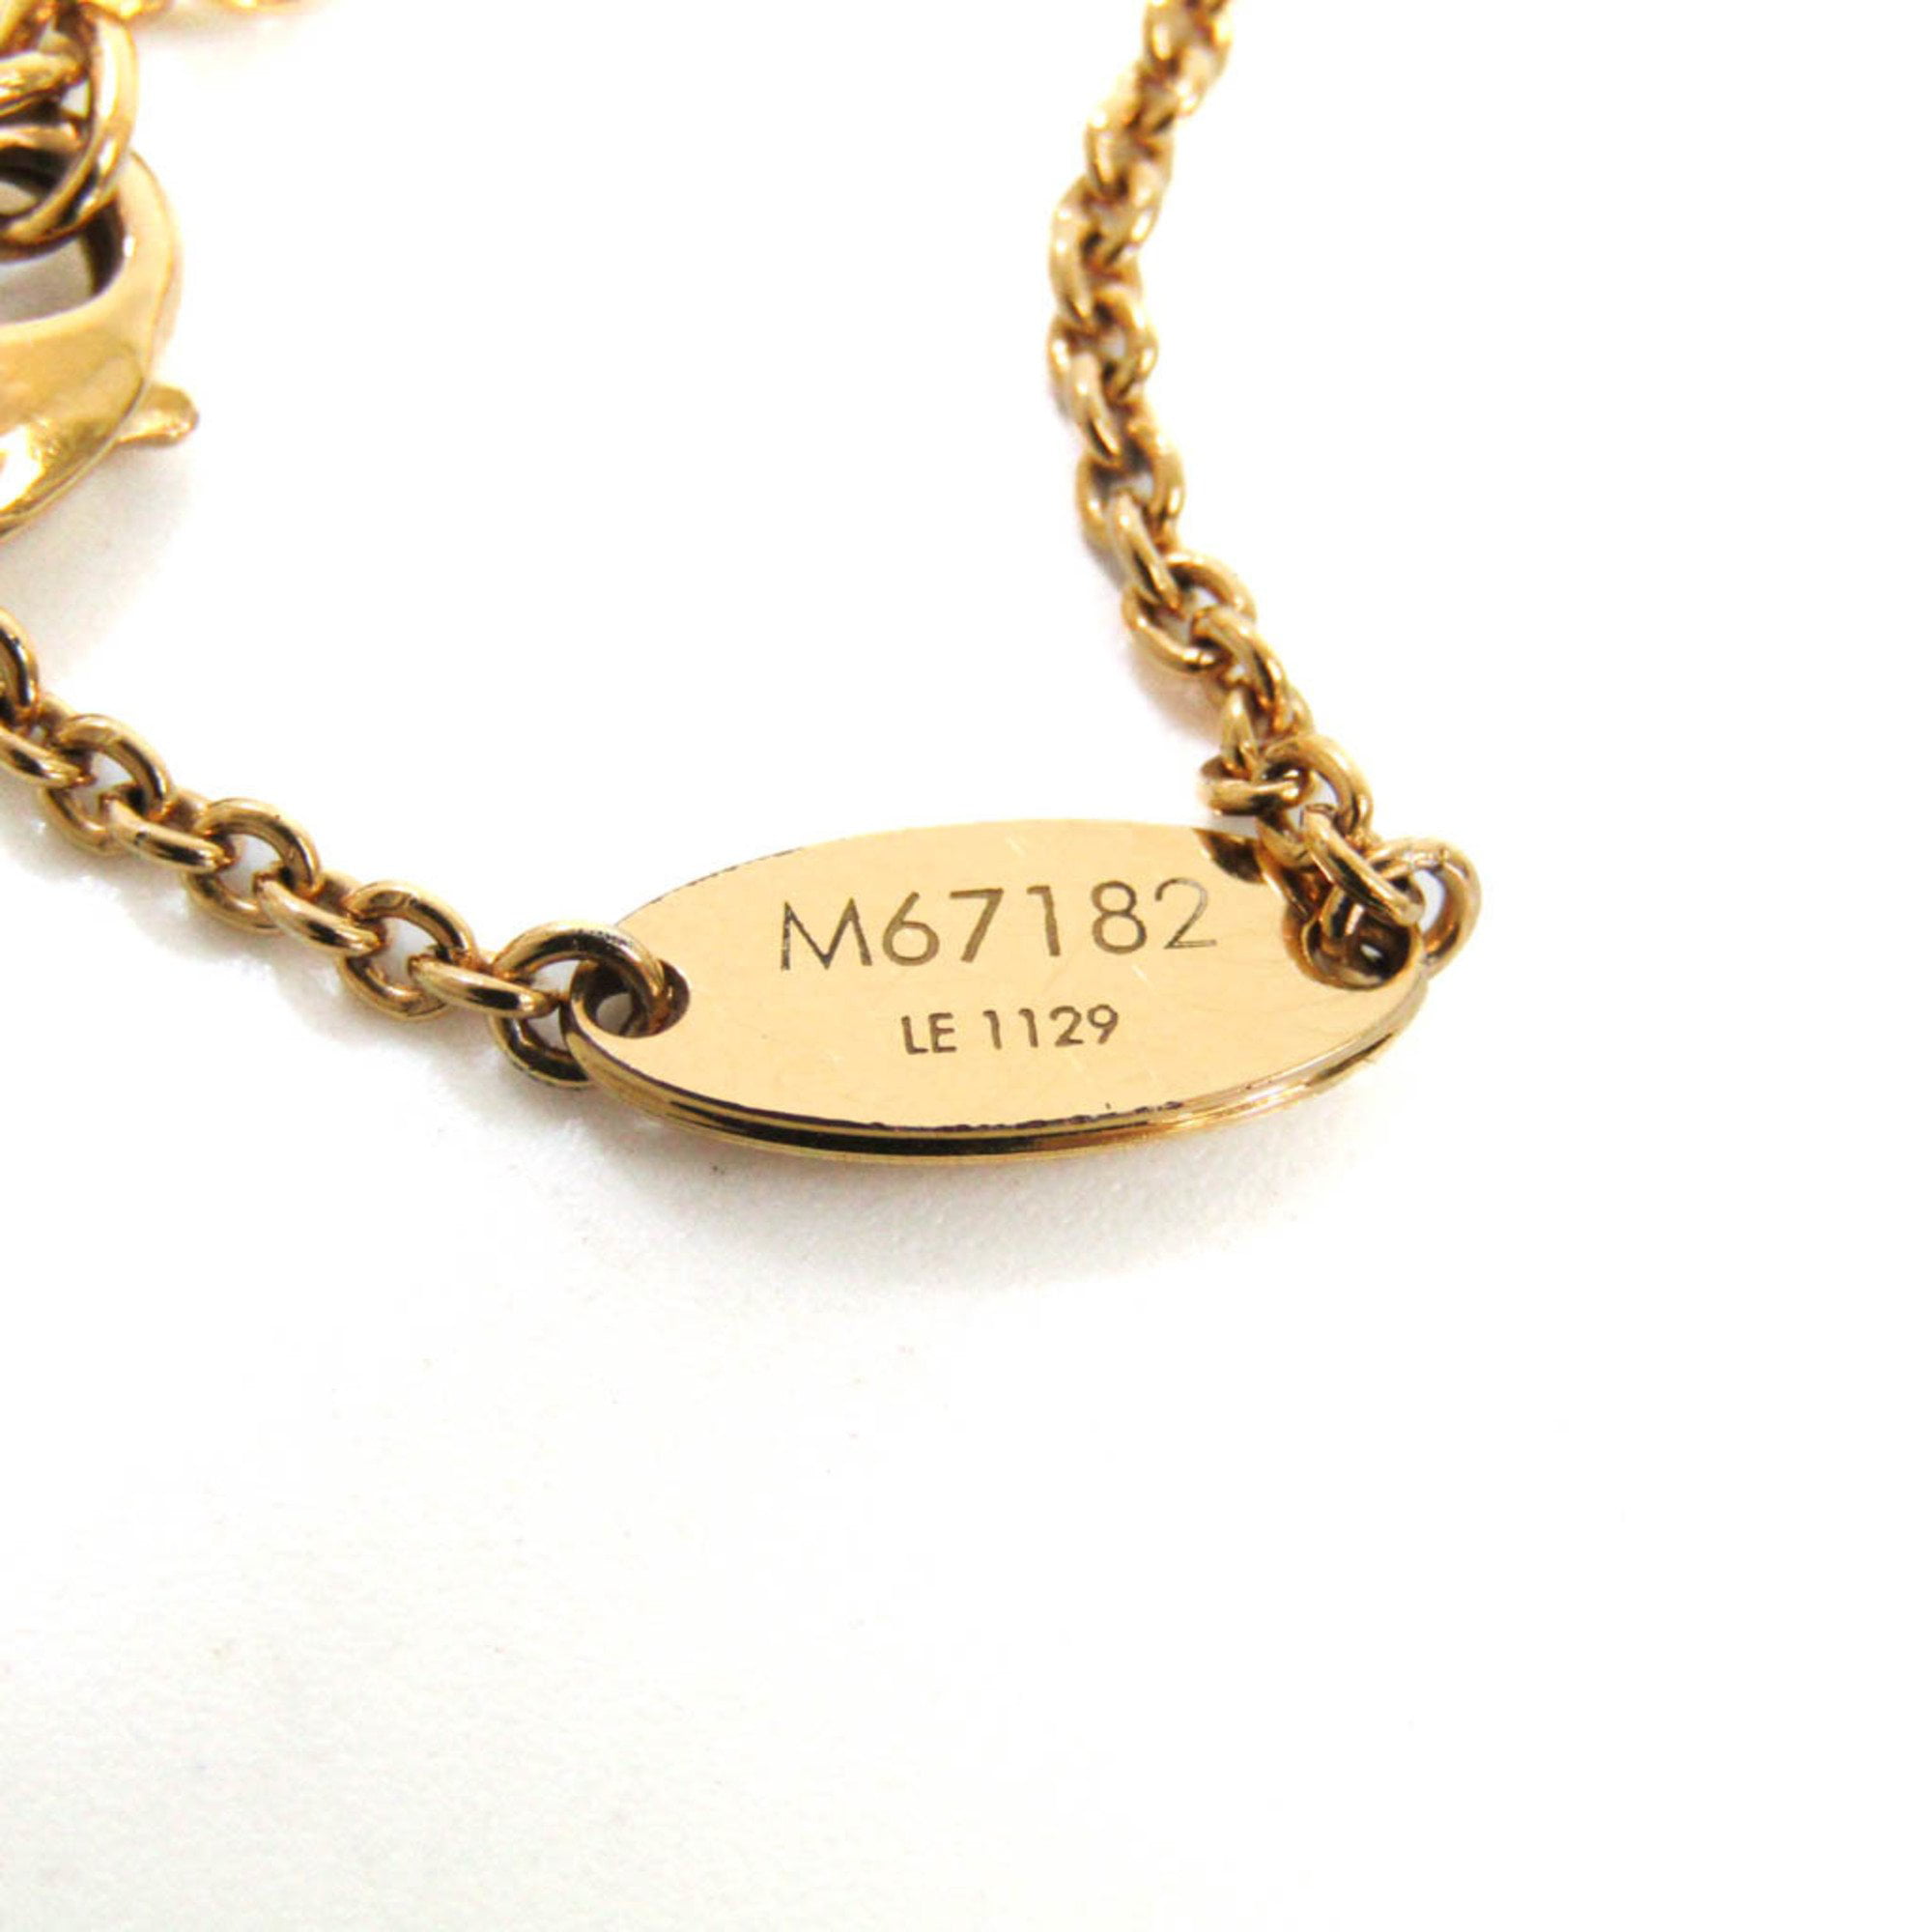 Louis Vuitton - Authenticated Bracelet - Chain Gold for Women, Very Good Condition